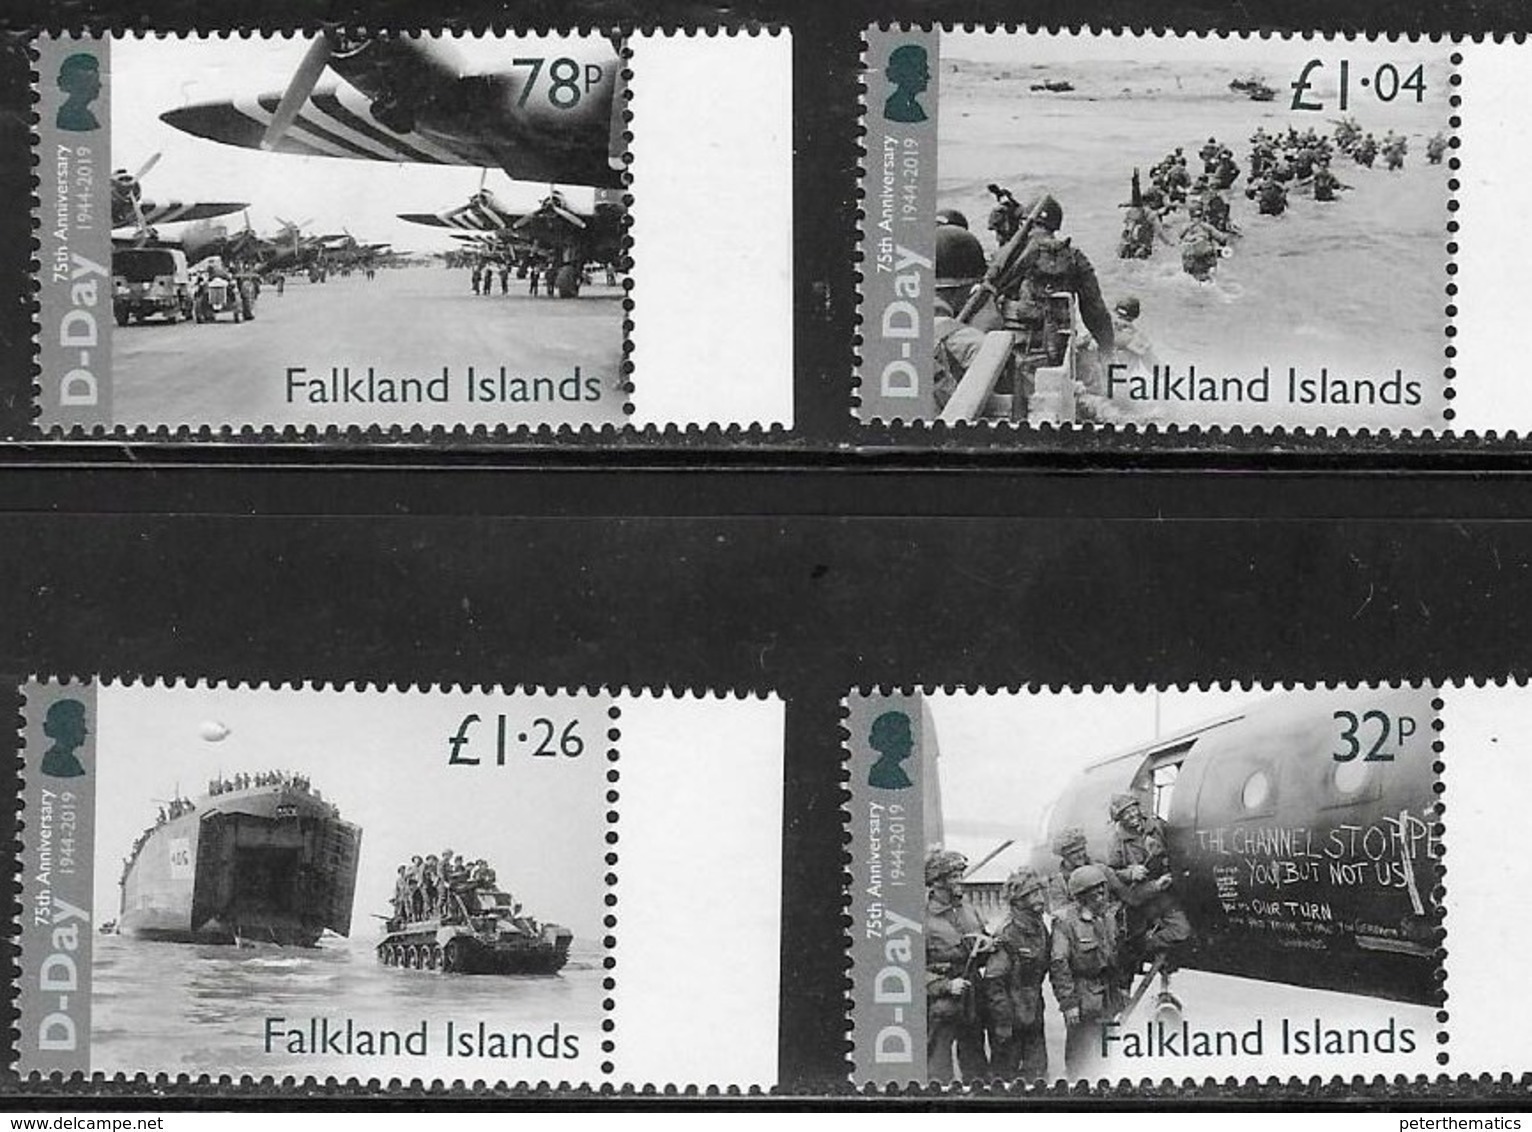 FALKLAND ISLANDS, 2019, MNH, WWII, D-DAY, SHIPS, PLANES, TANKS, MILITARY, 4v - WW2